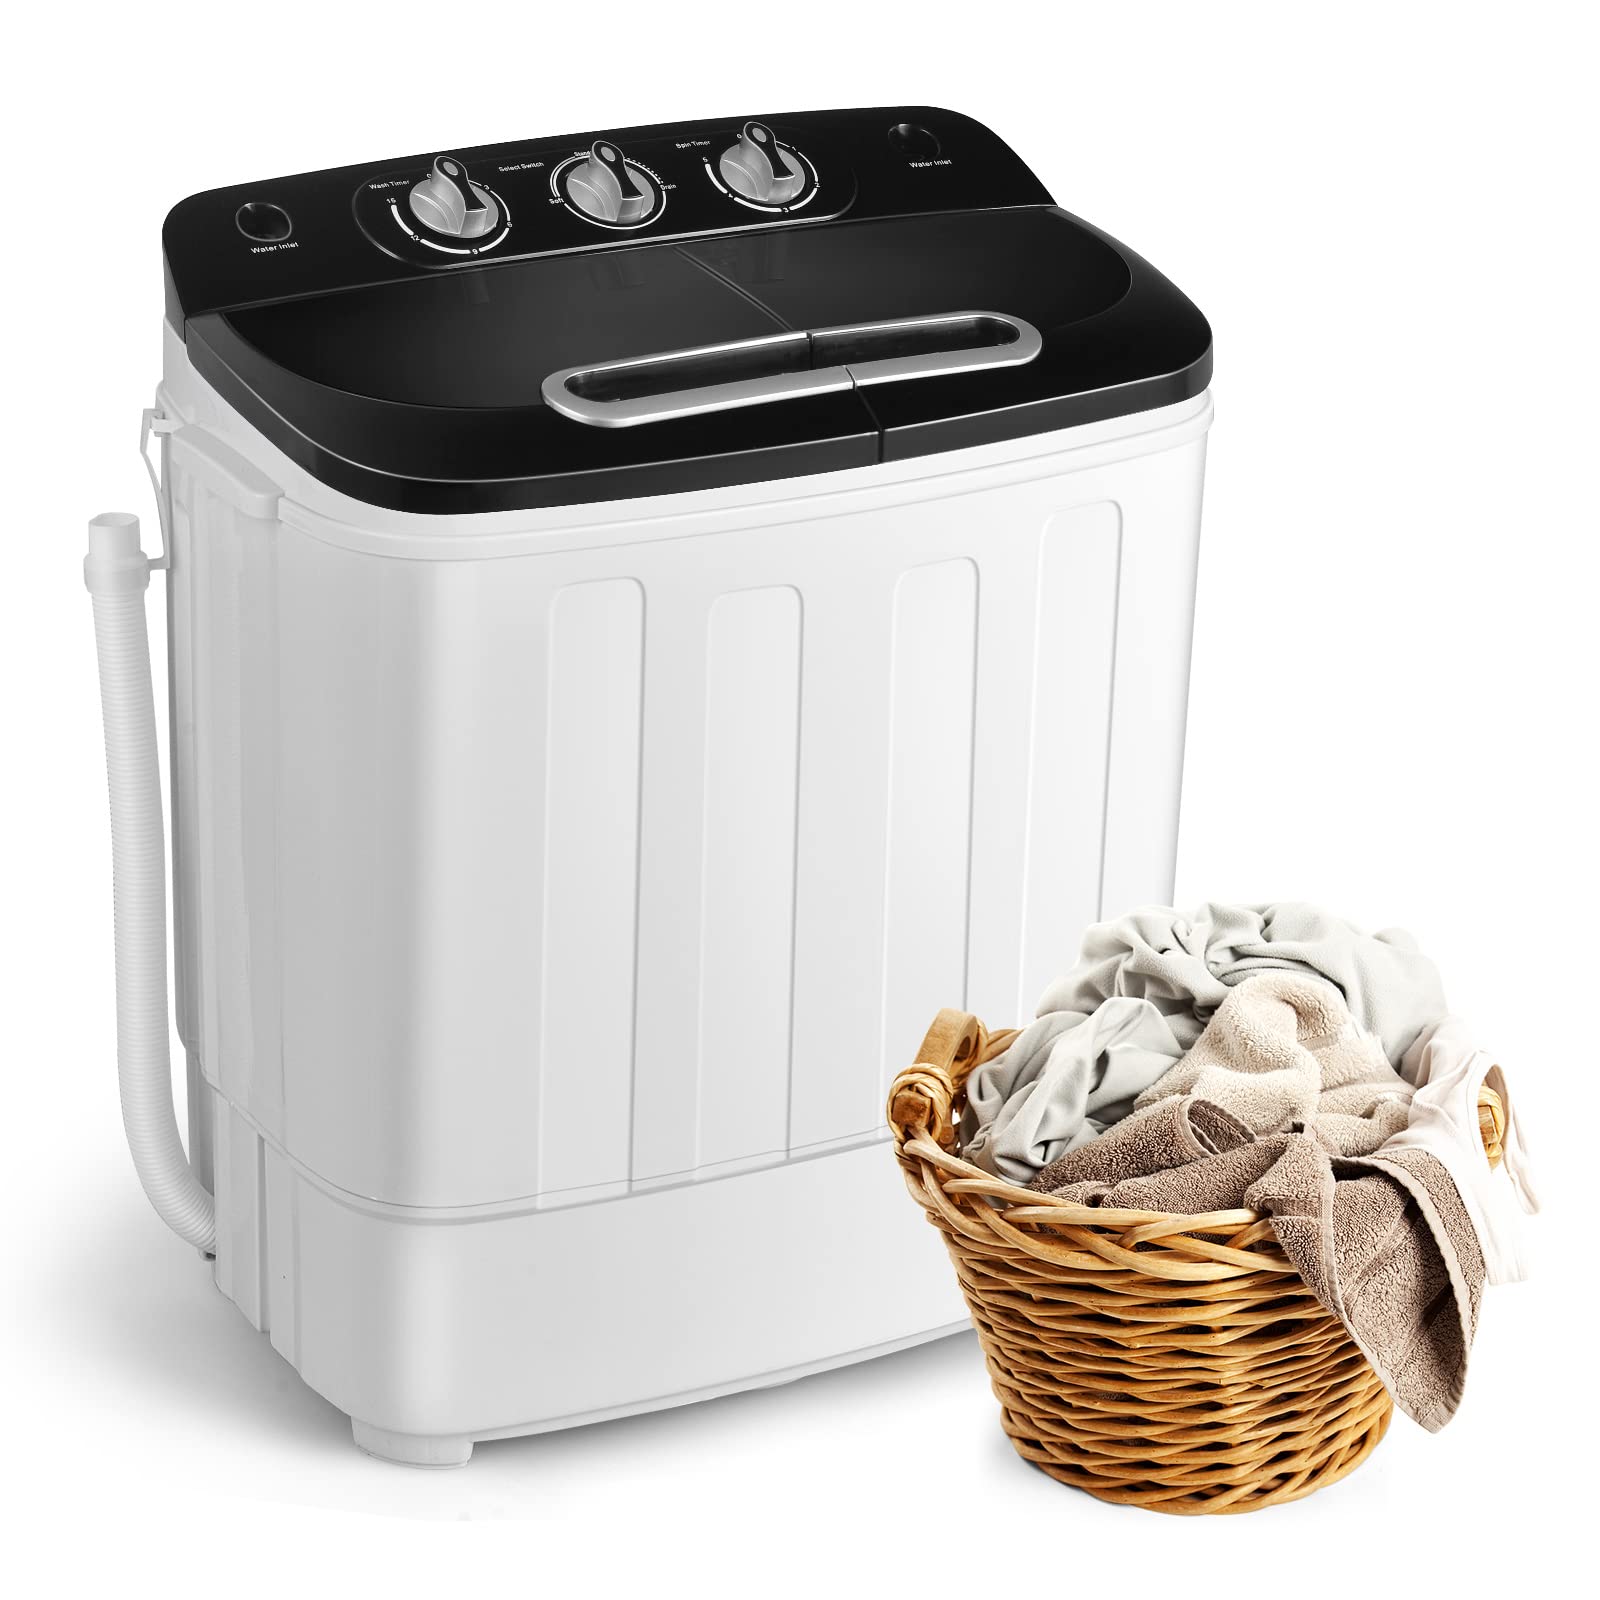 Who Makes the Best Front Loader Washing Machine?